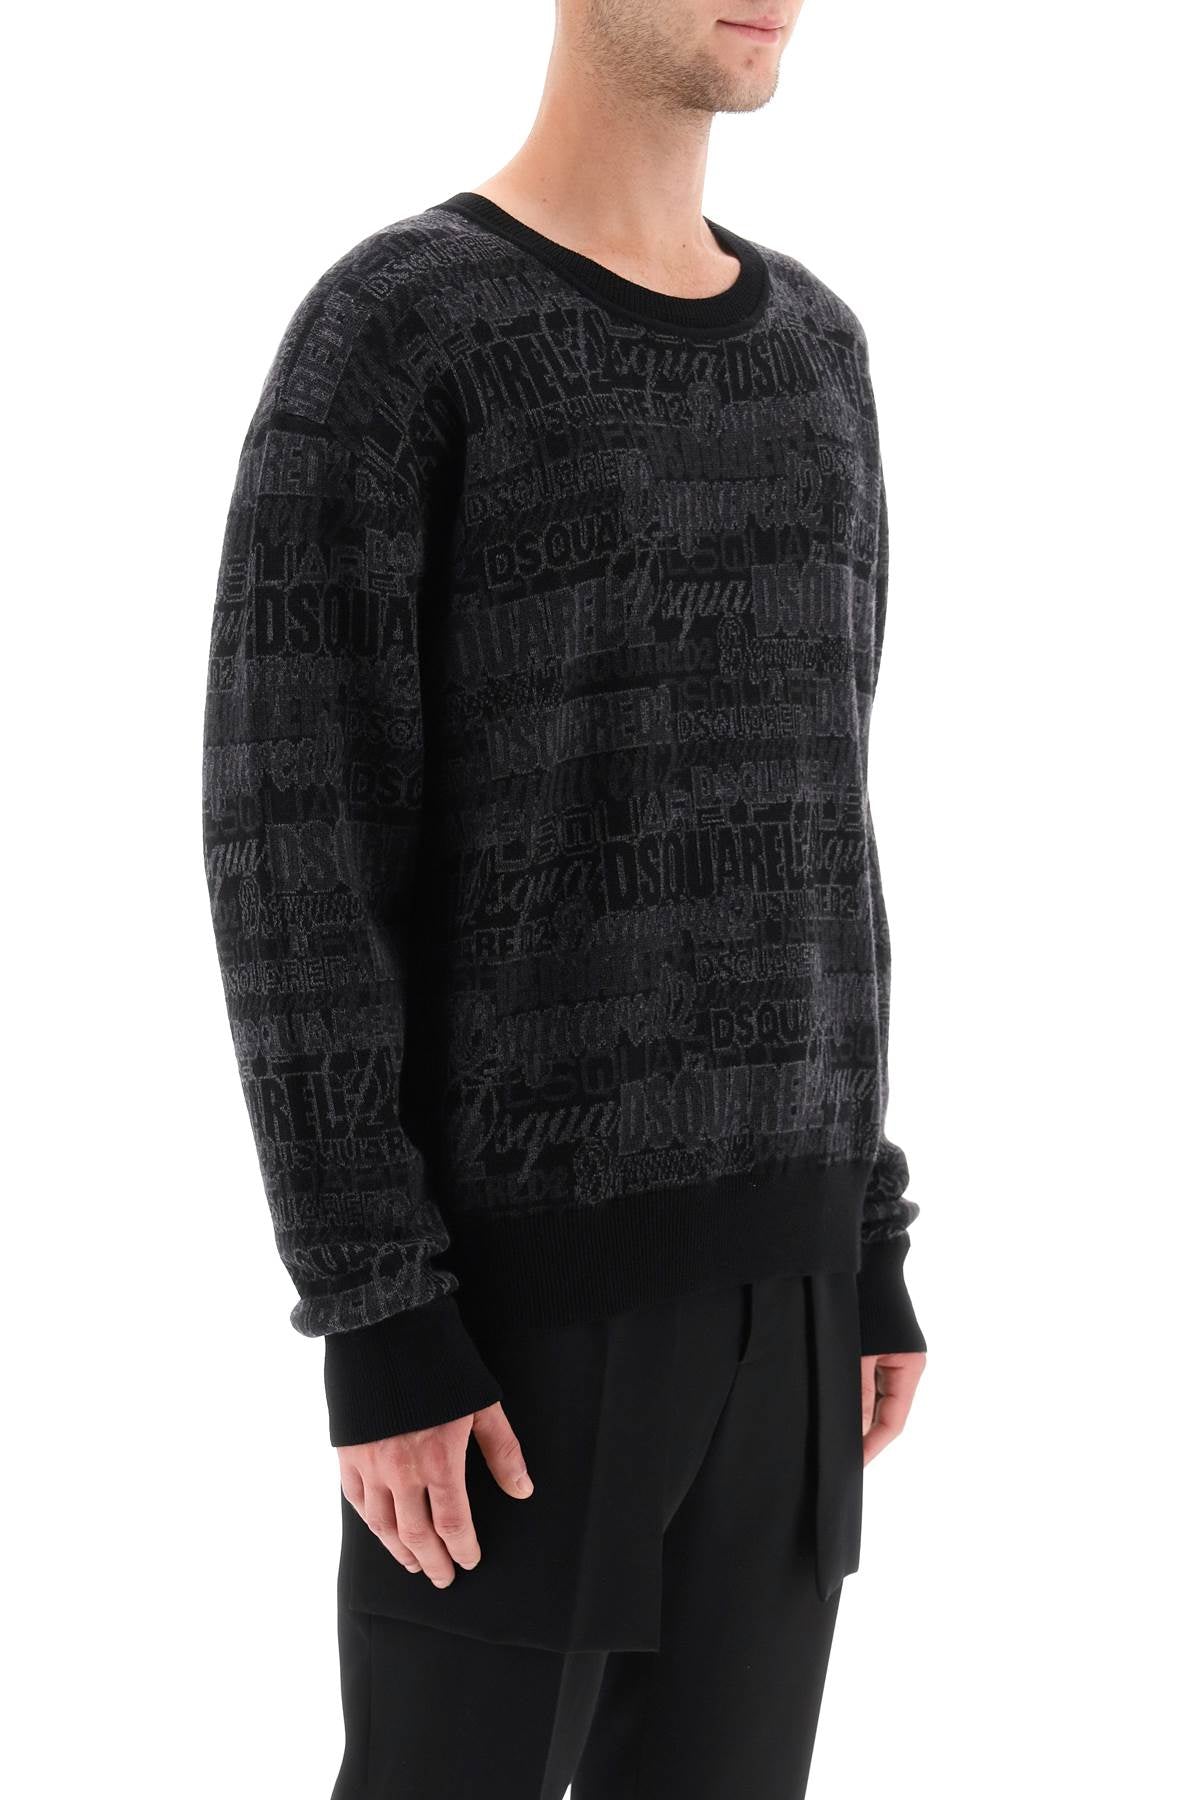 DSQUARED2 Men's Grey Wool Sweater with Logo Lettering Motif FW23